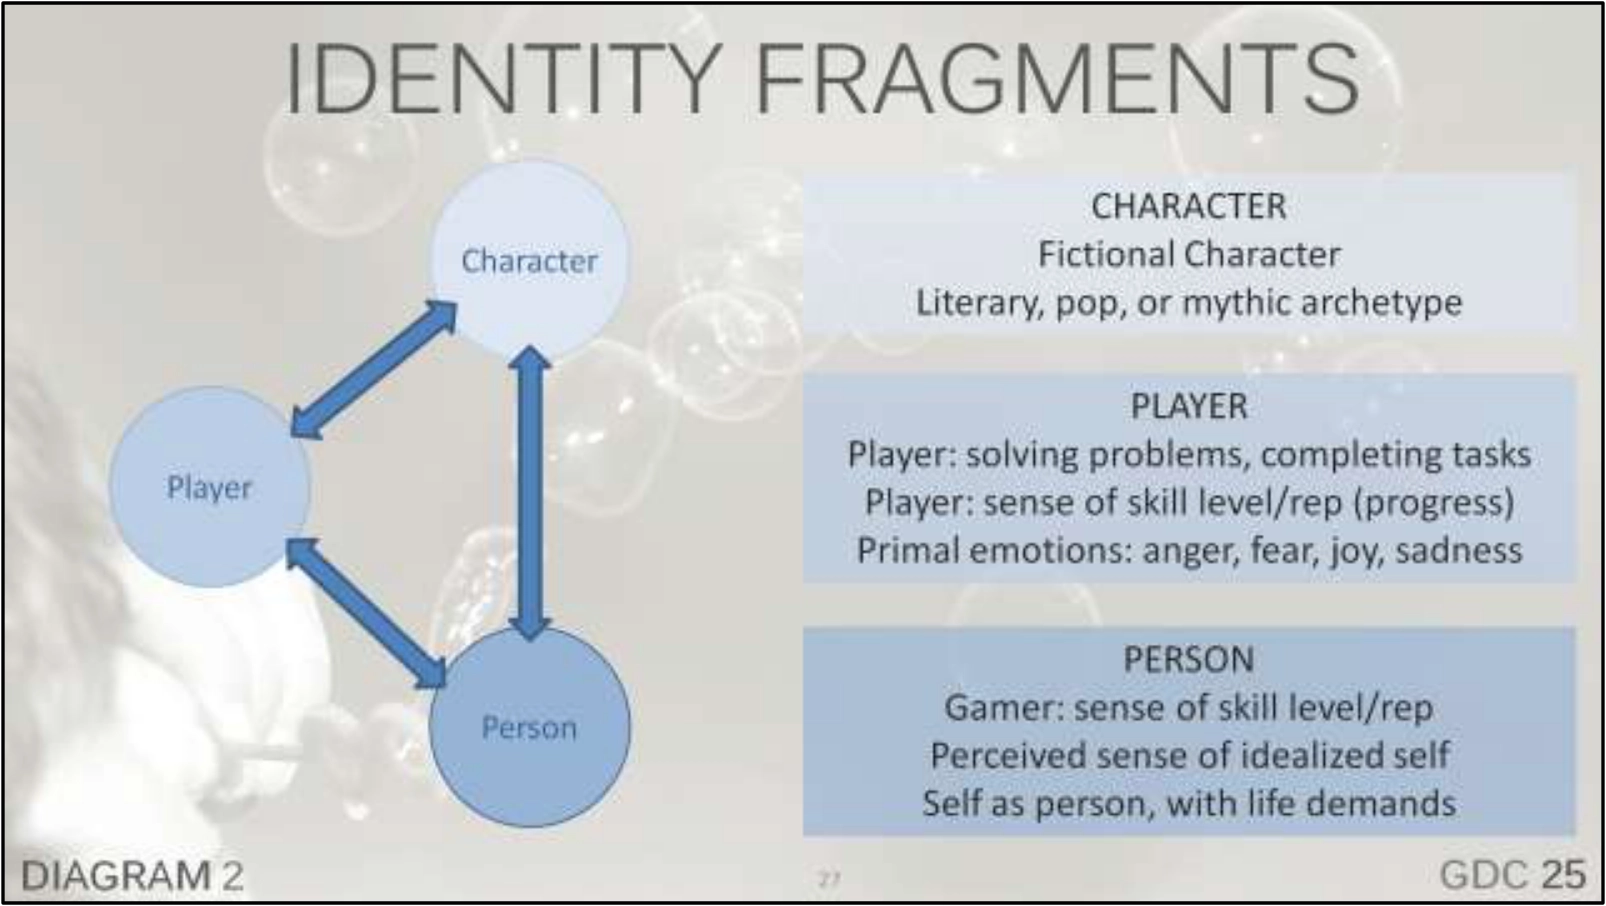 Identity is composed of character, player, and person.